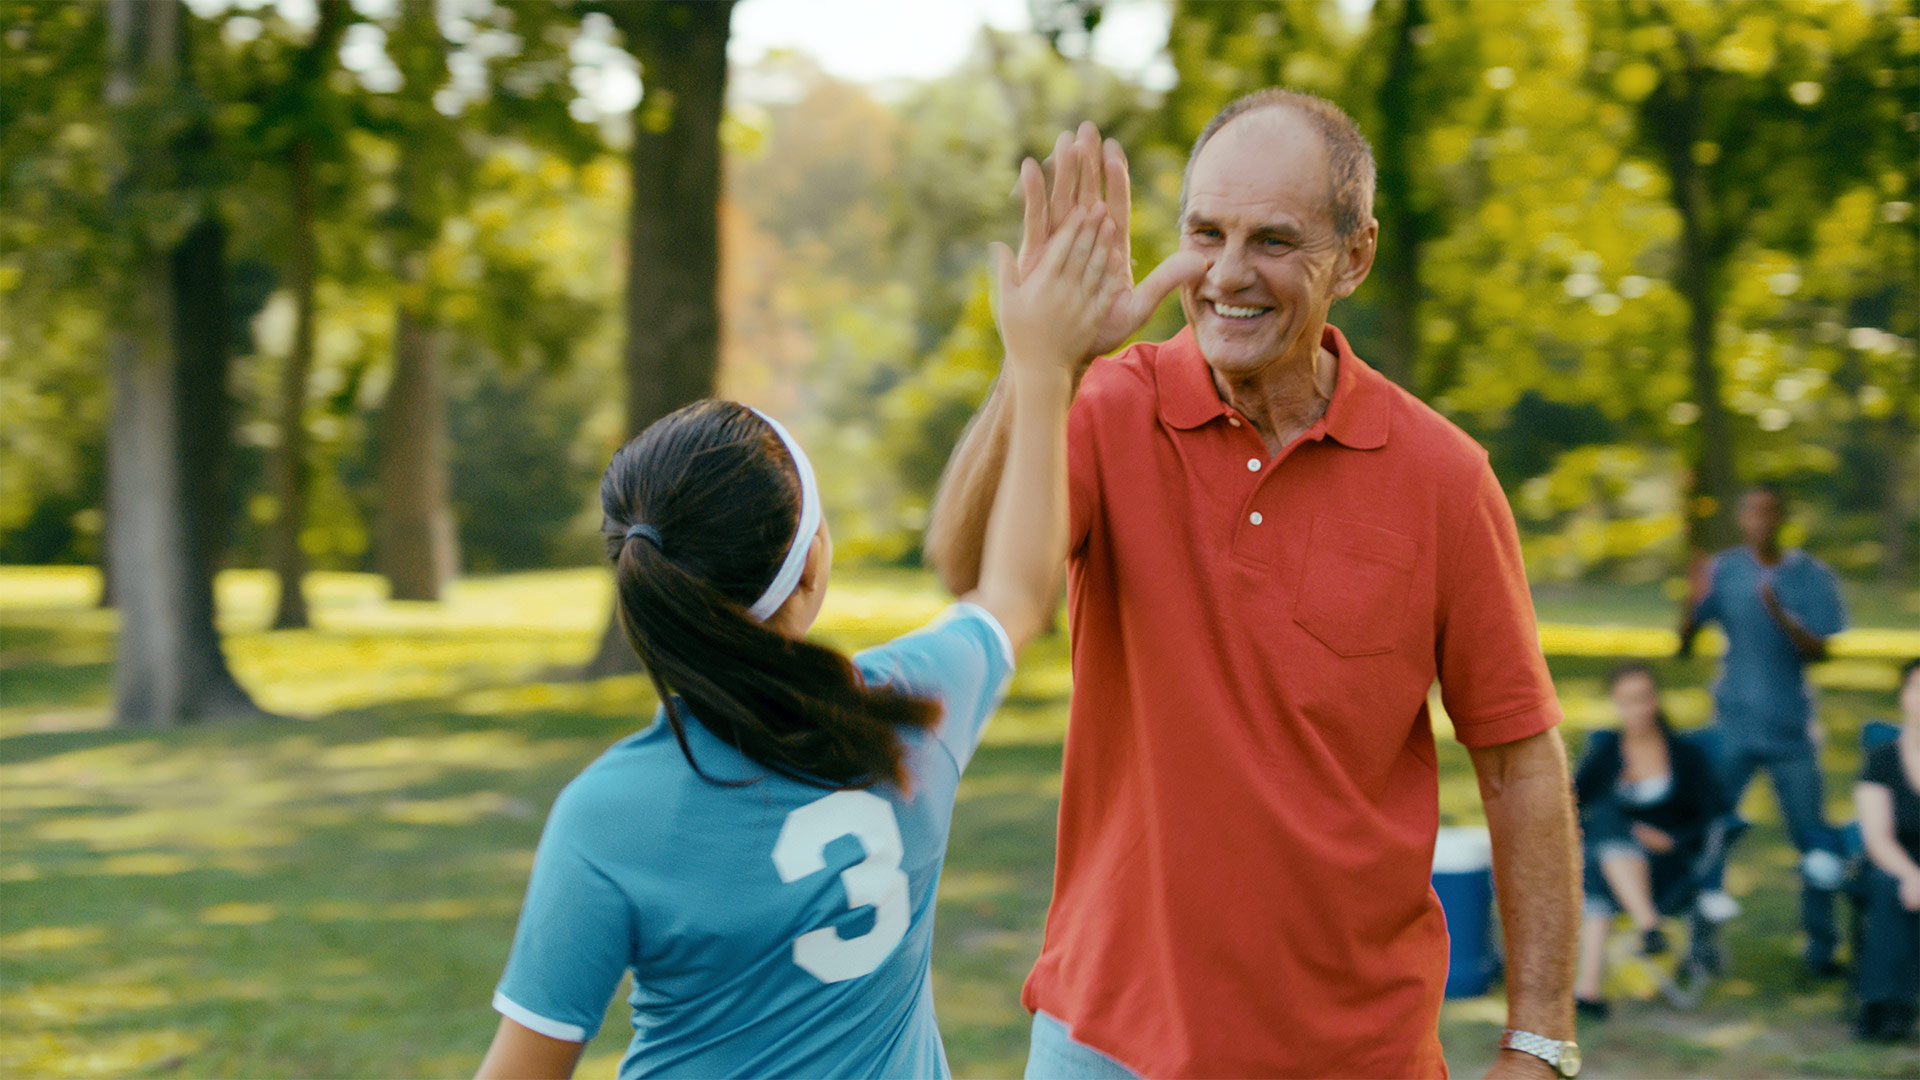 A man high-fiving a young woman playing soccer.